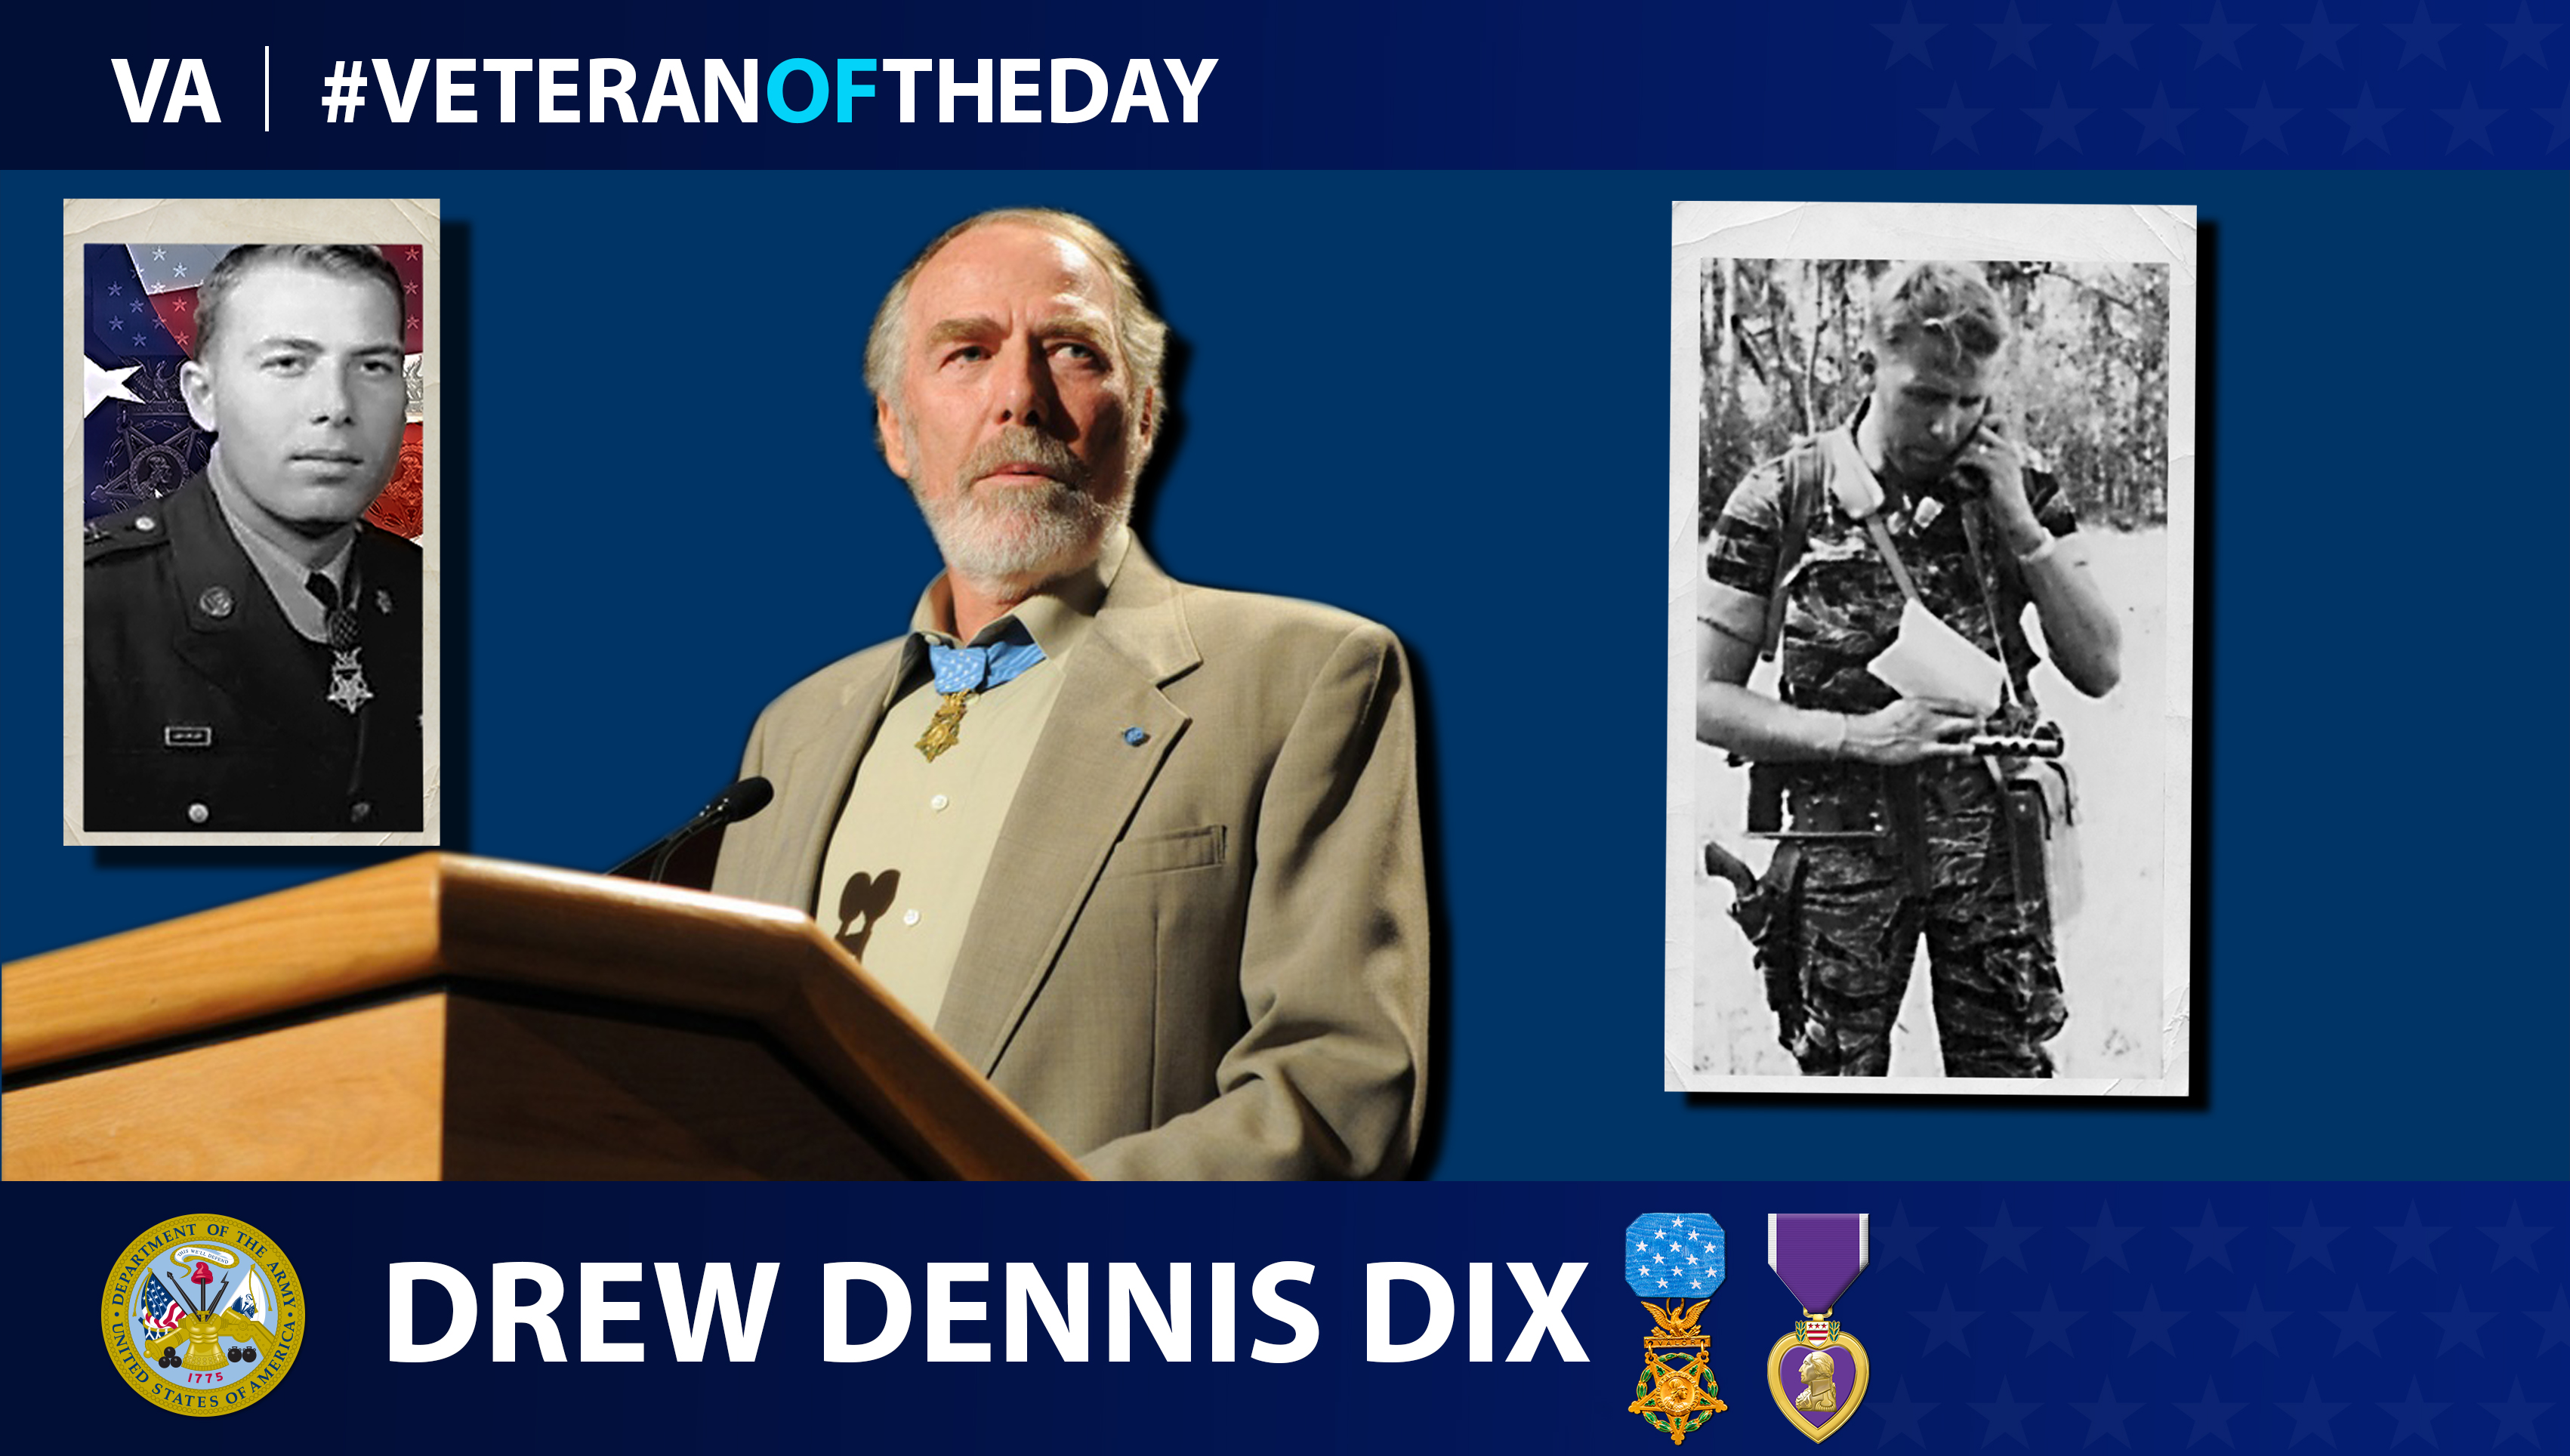 Army Veteran Drew Dennis Dix is today's Veteran of the day.